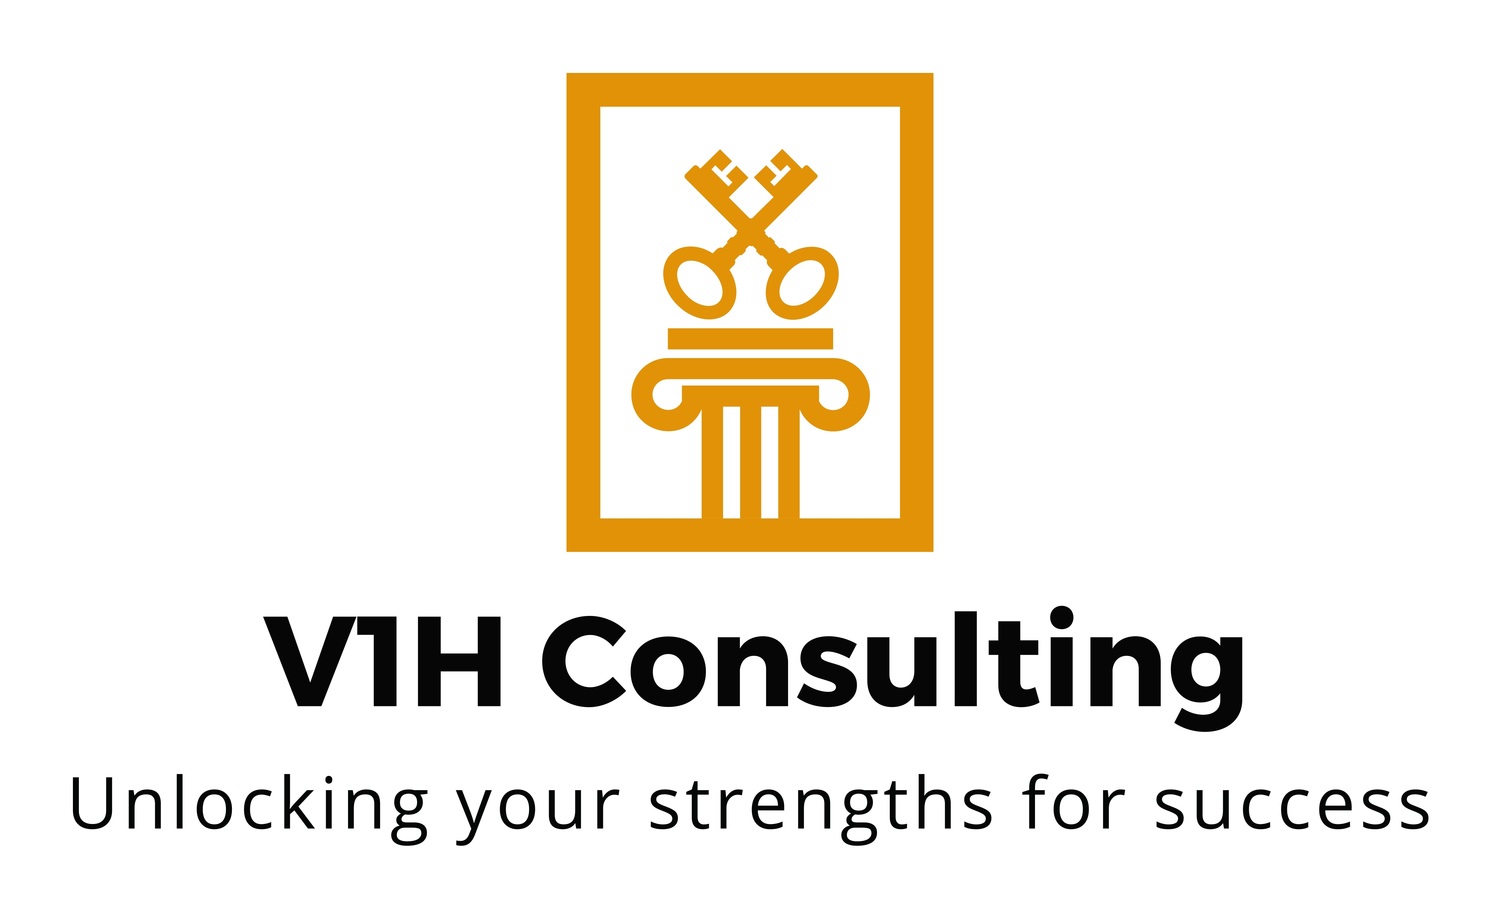 V1H CONSULTING